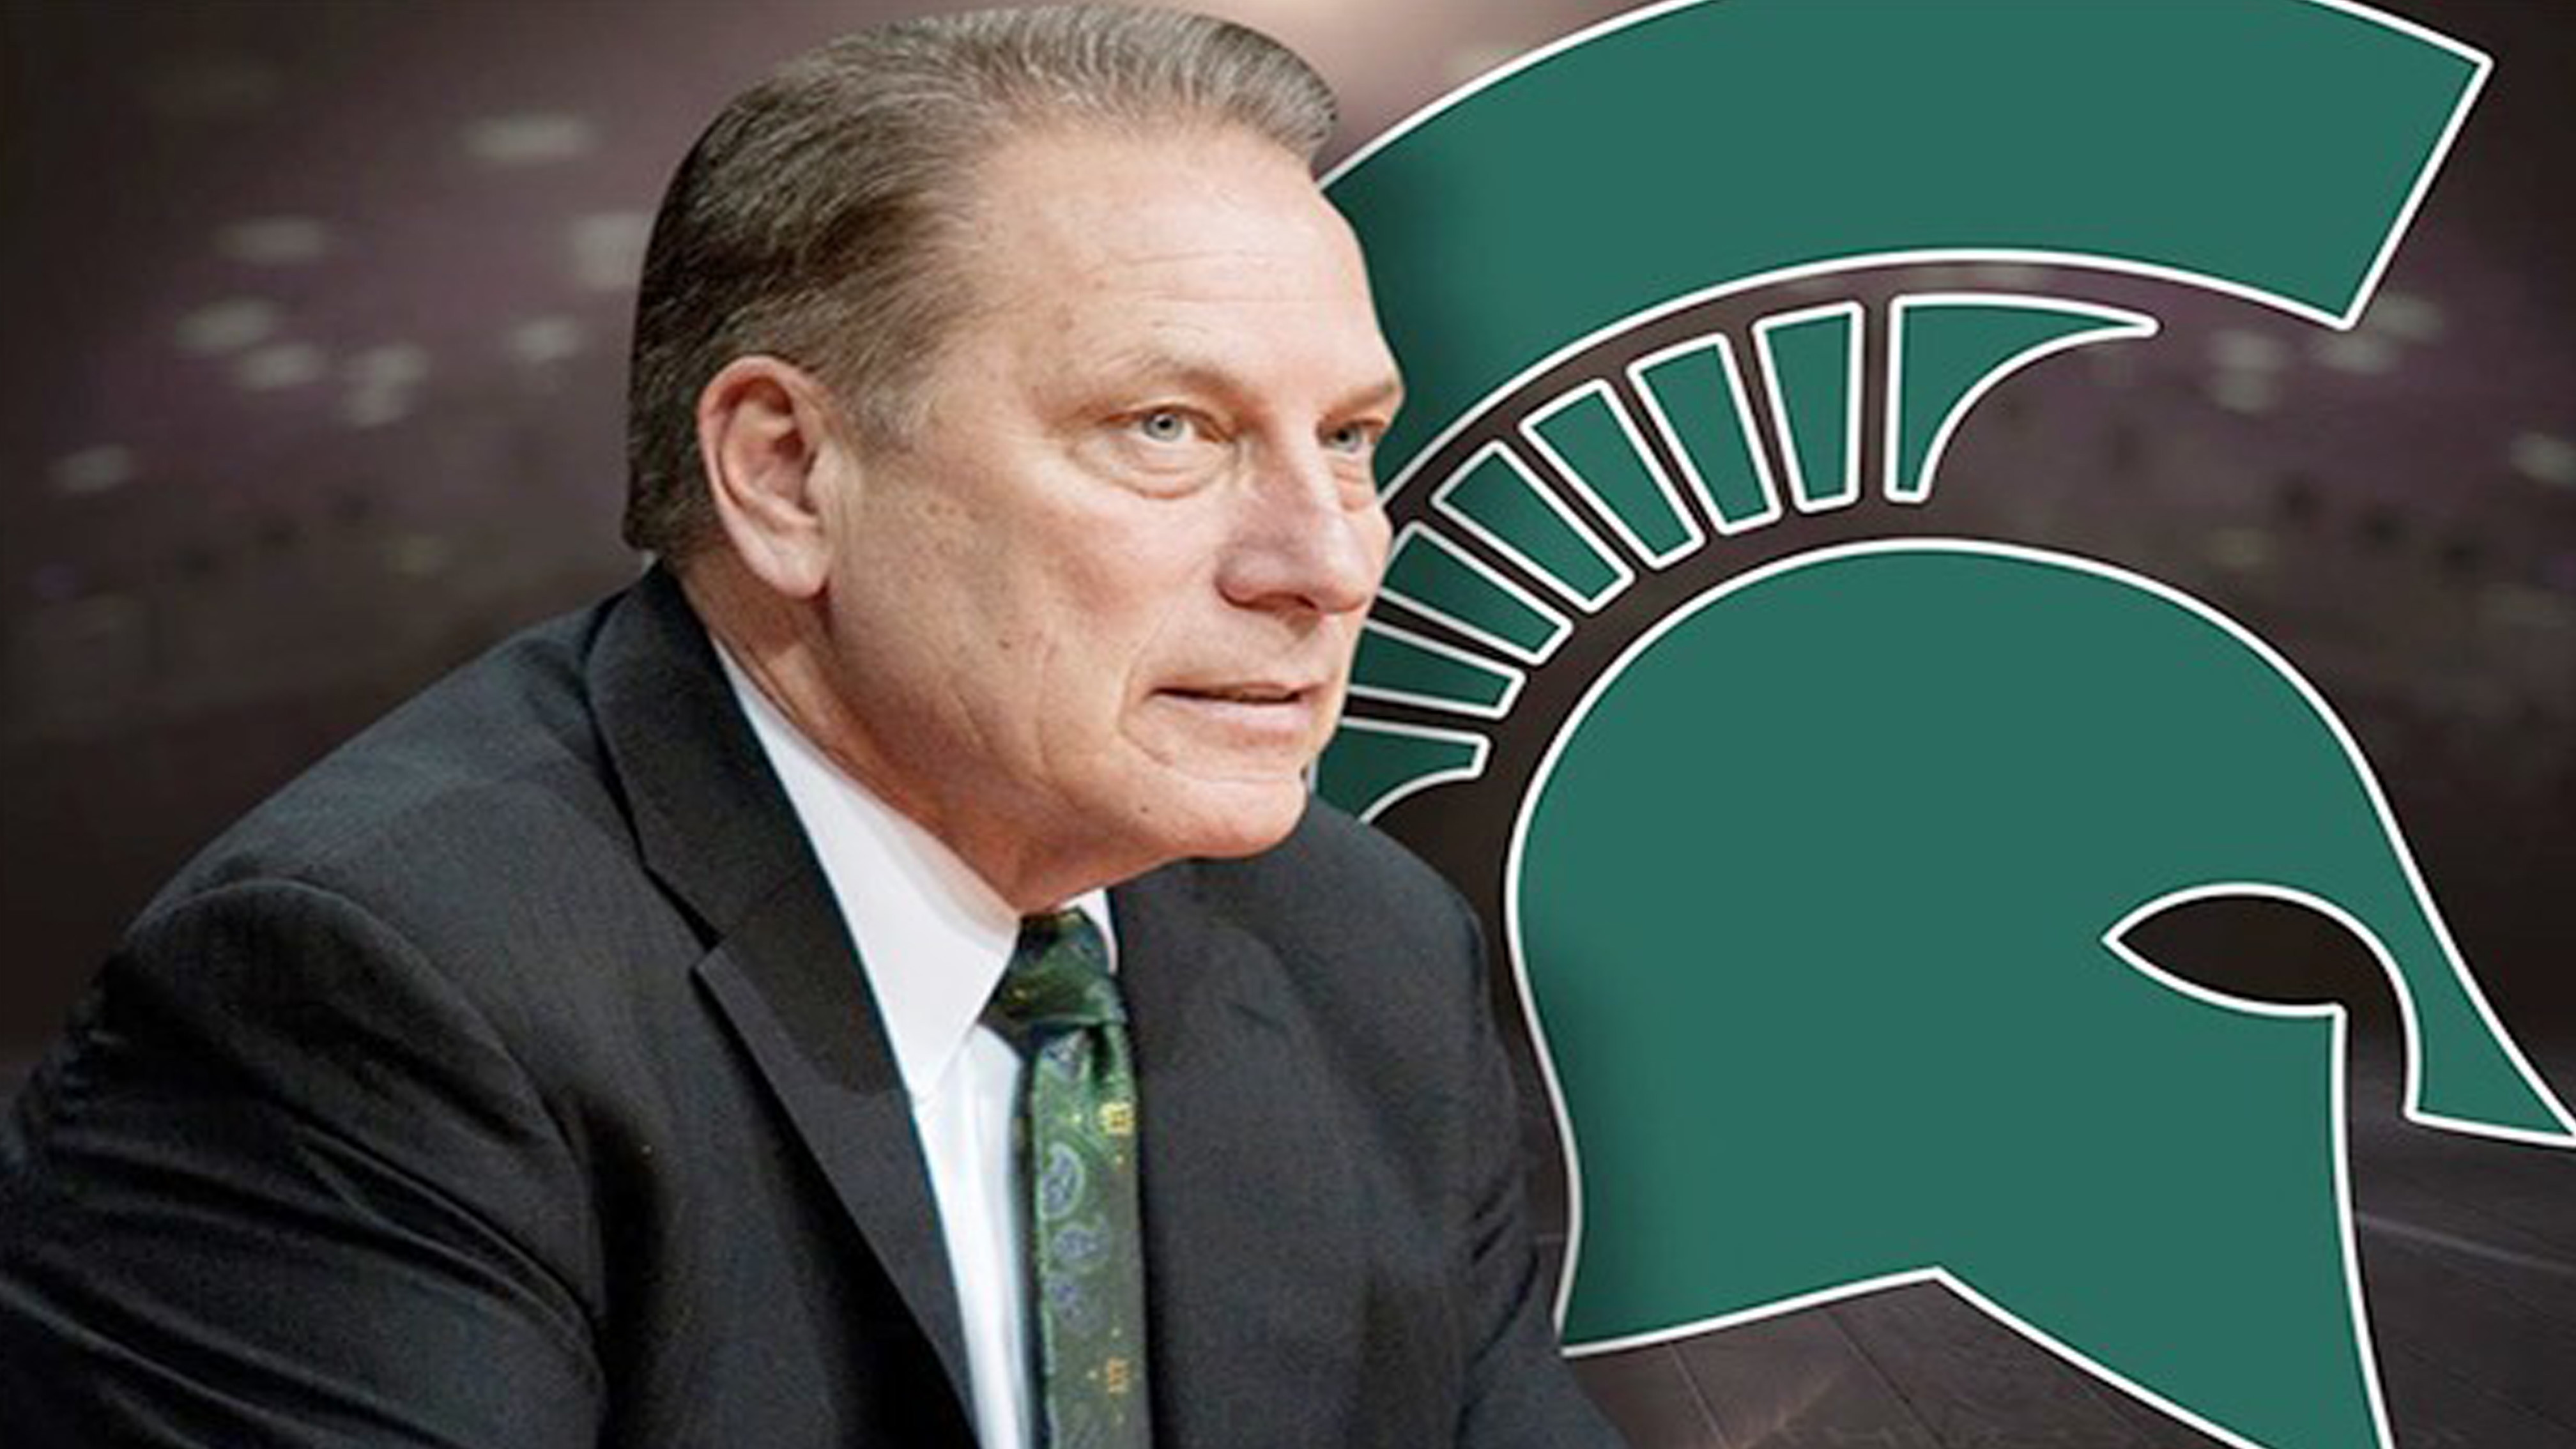 Michigan State Basketball Coach Tom Izzo Tests Positive for COVID-19